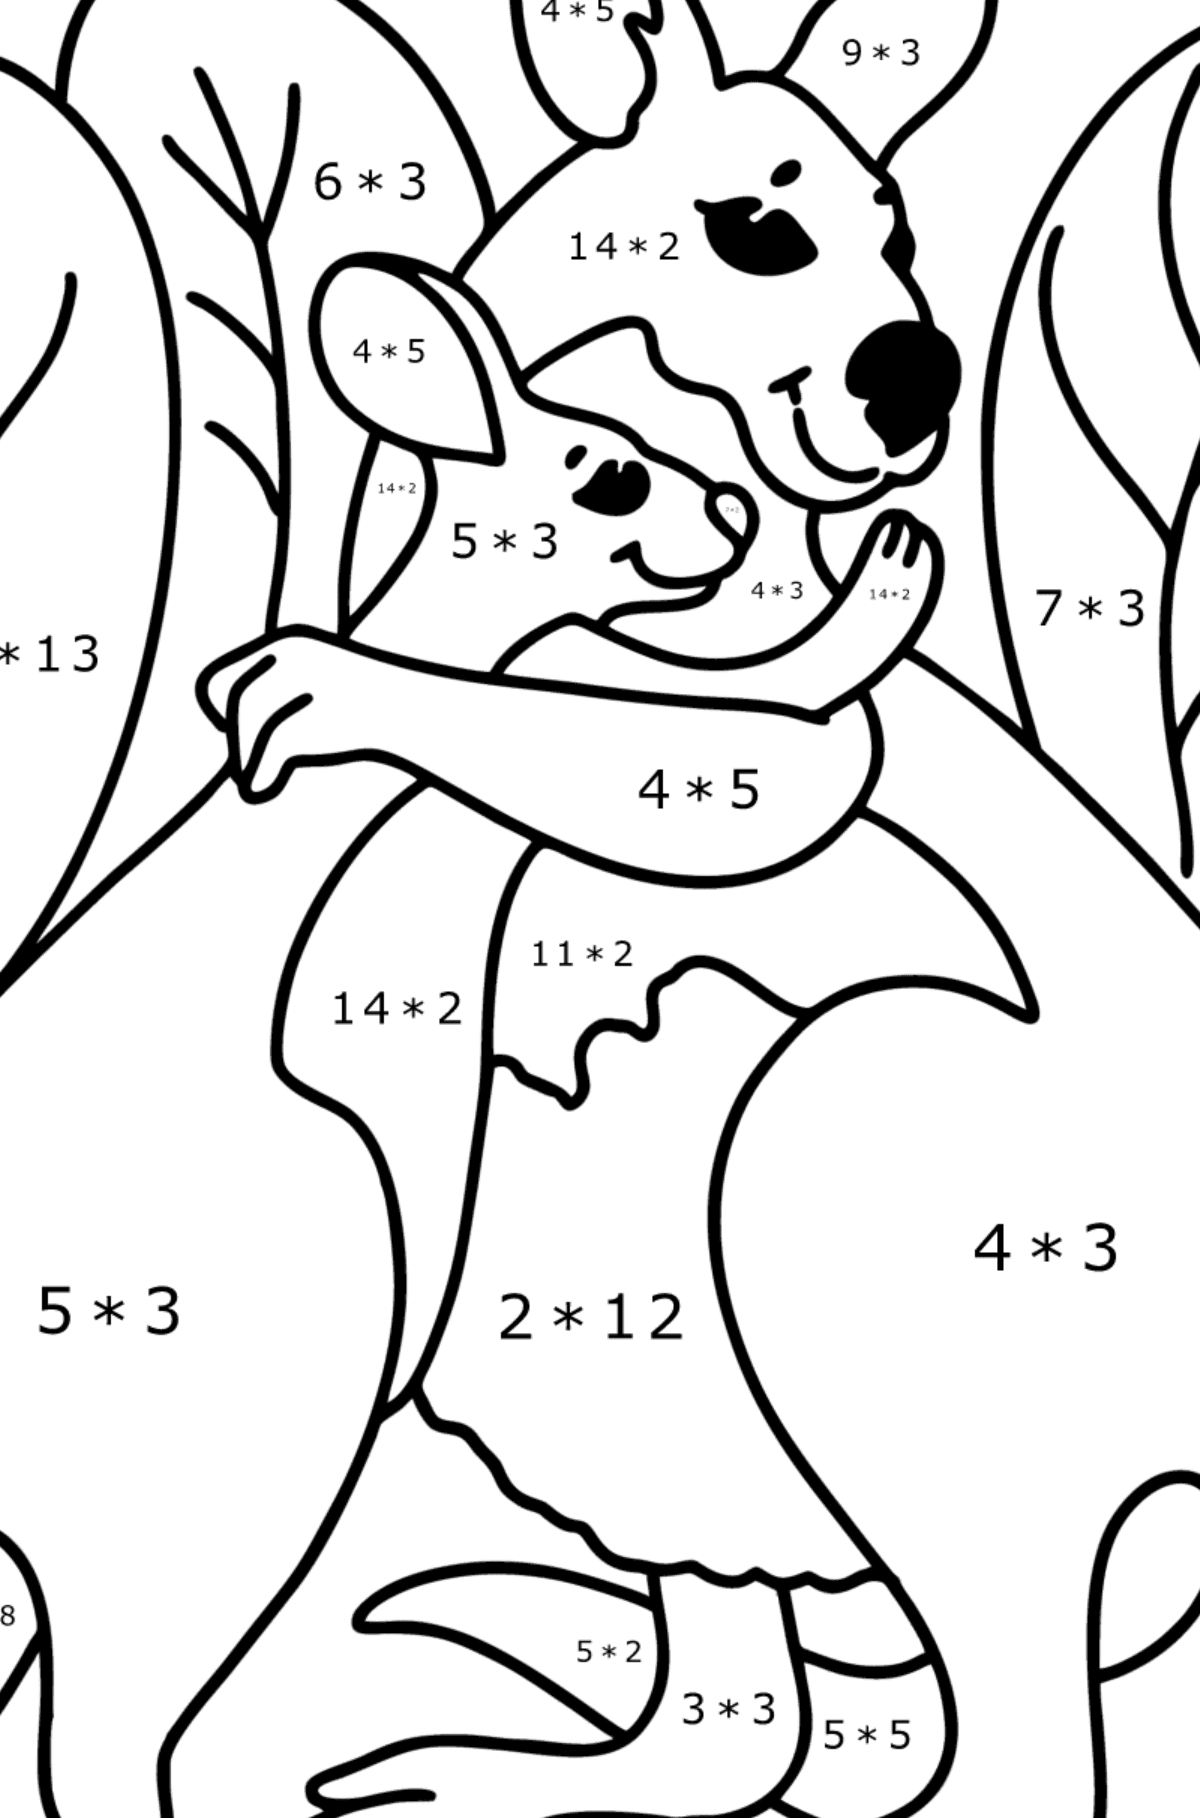 Coloring page - cute kangaroo - Math Coloring - Multiplication for Kids